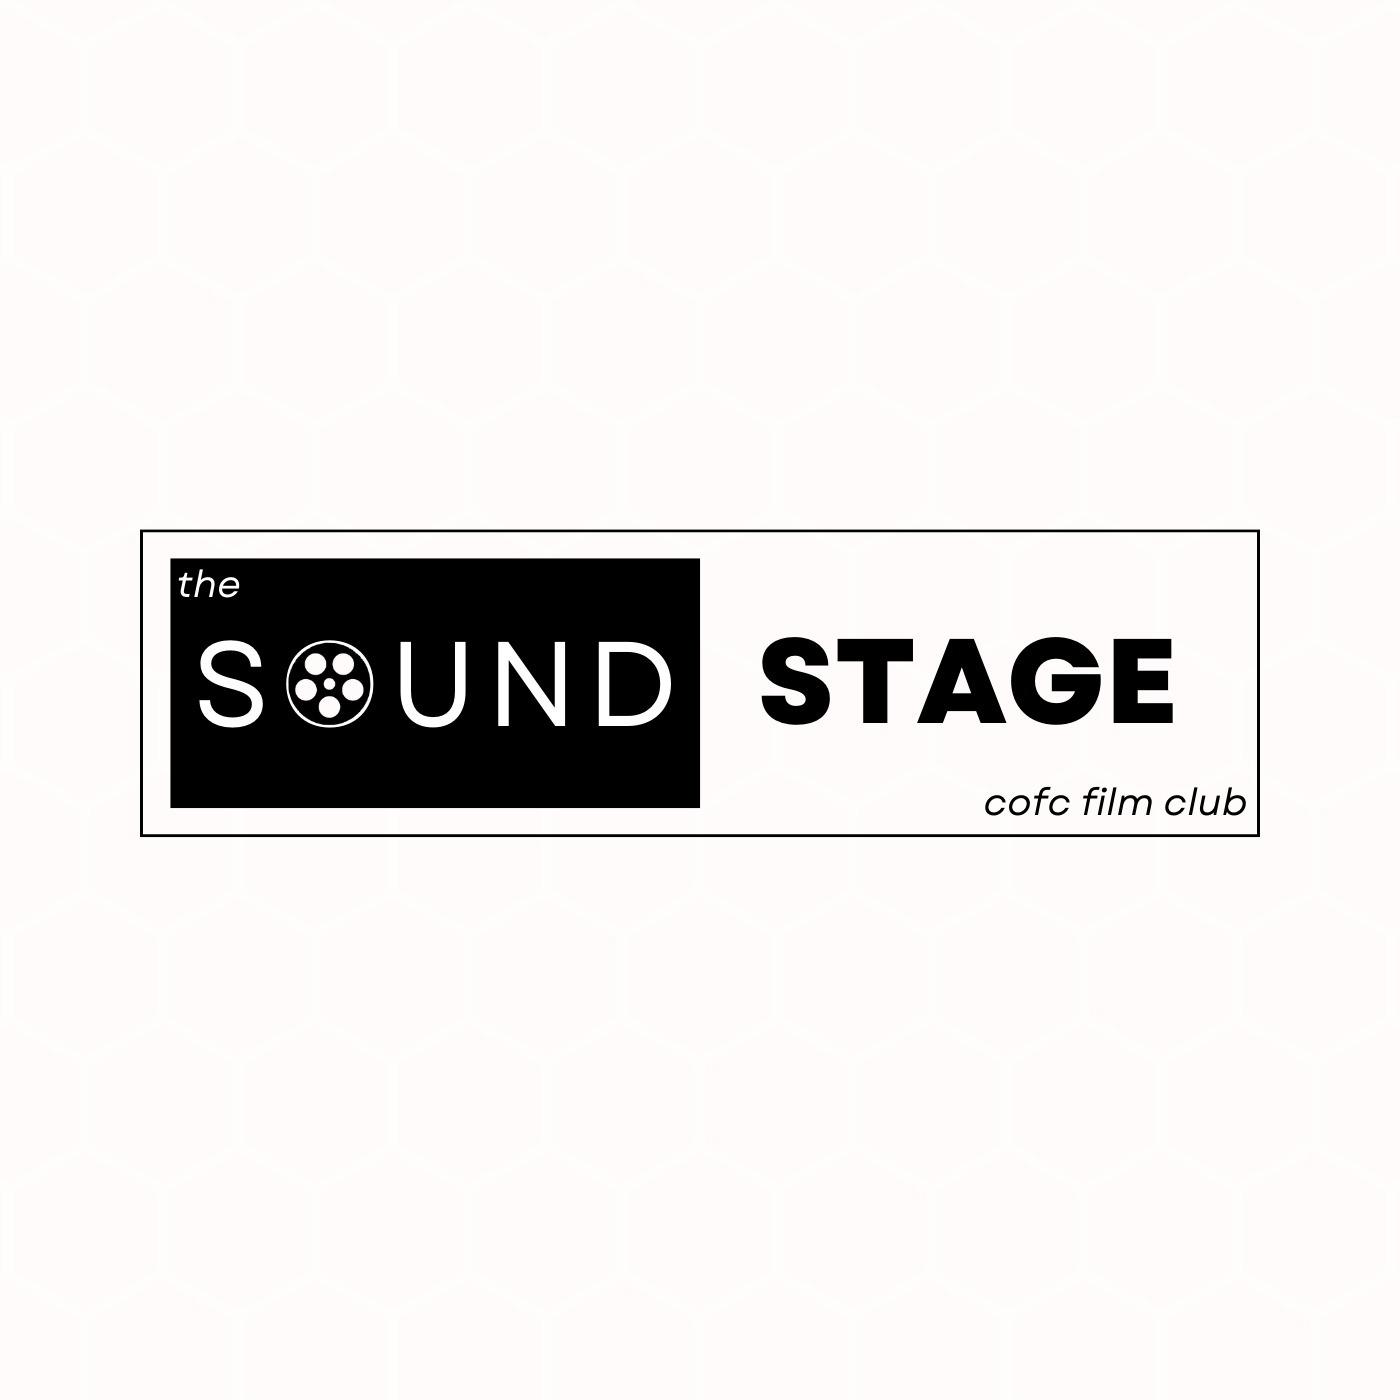 The Soundstage